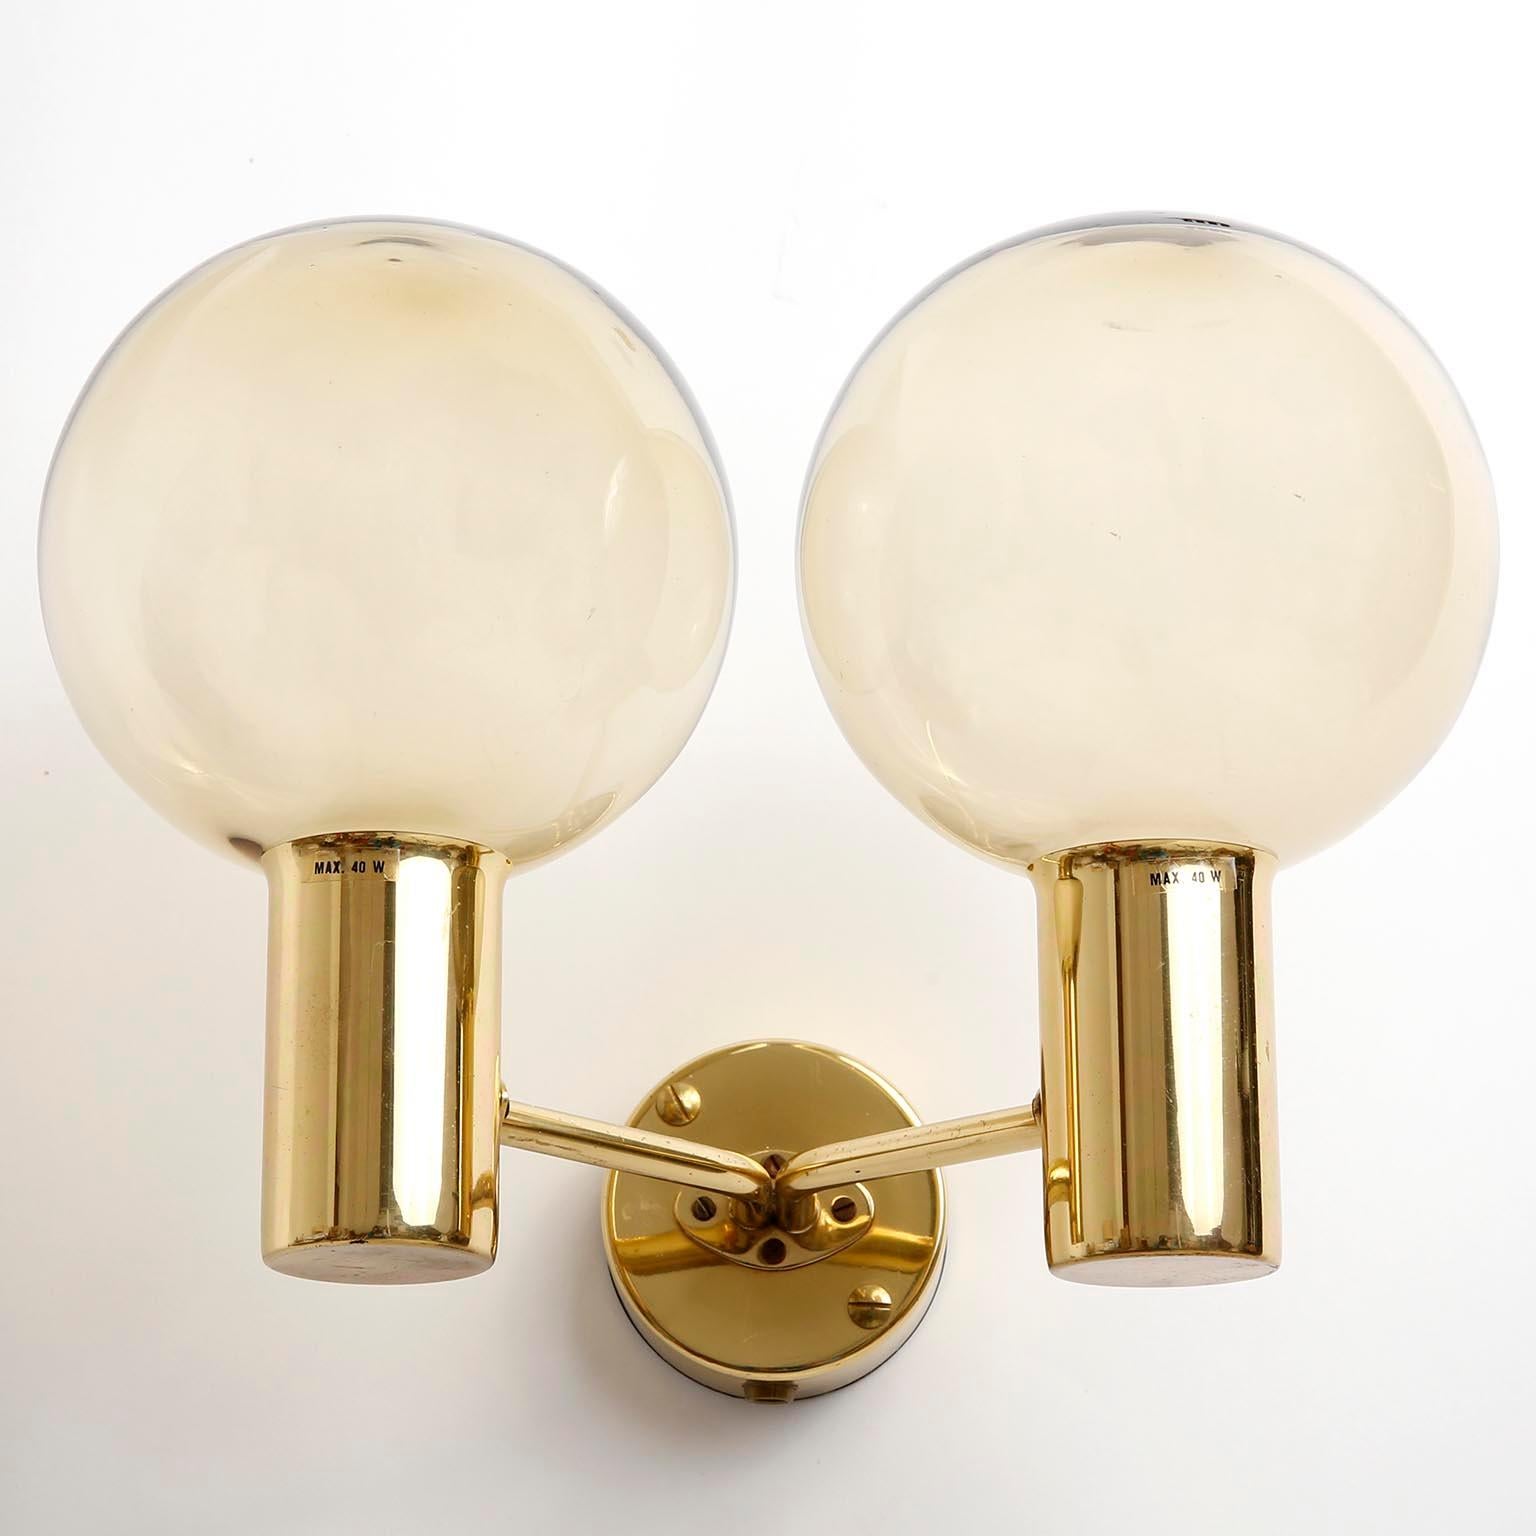 A pair of Scandinavian Modern wall lamps model V 149/2 designed by Hans Agne Jakobsson for AB Markaryd, Sweden, manufactured in midcentury in 1960s.
They are made of a 2-arm polished brass frame which holds two ball shaped amber tone glass lamp